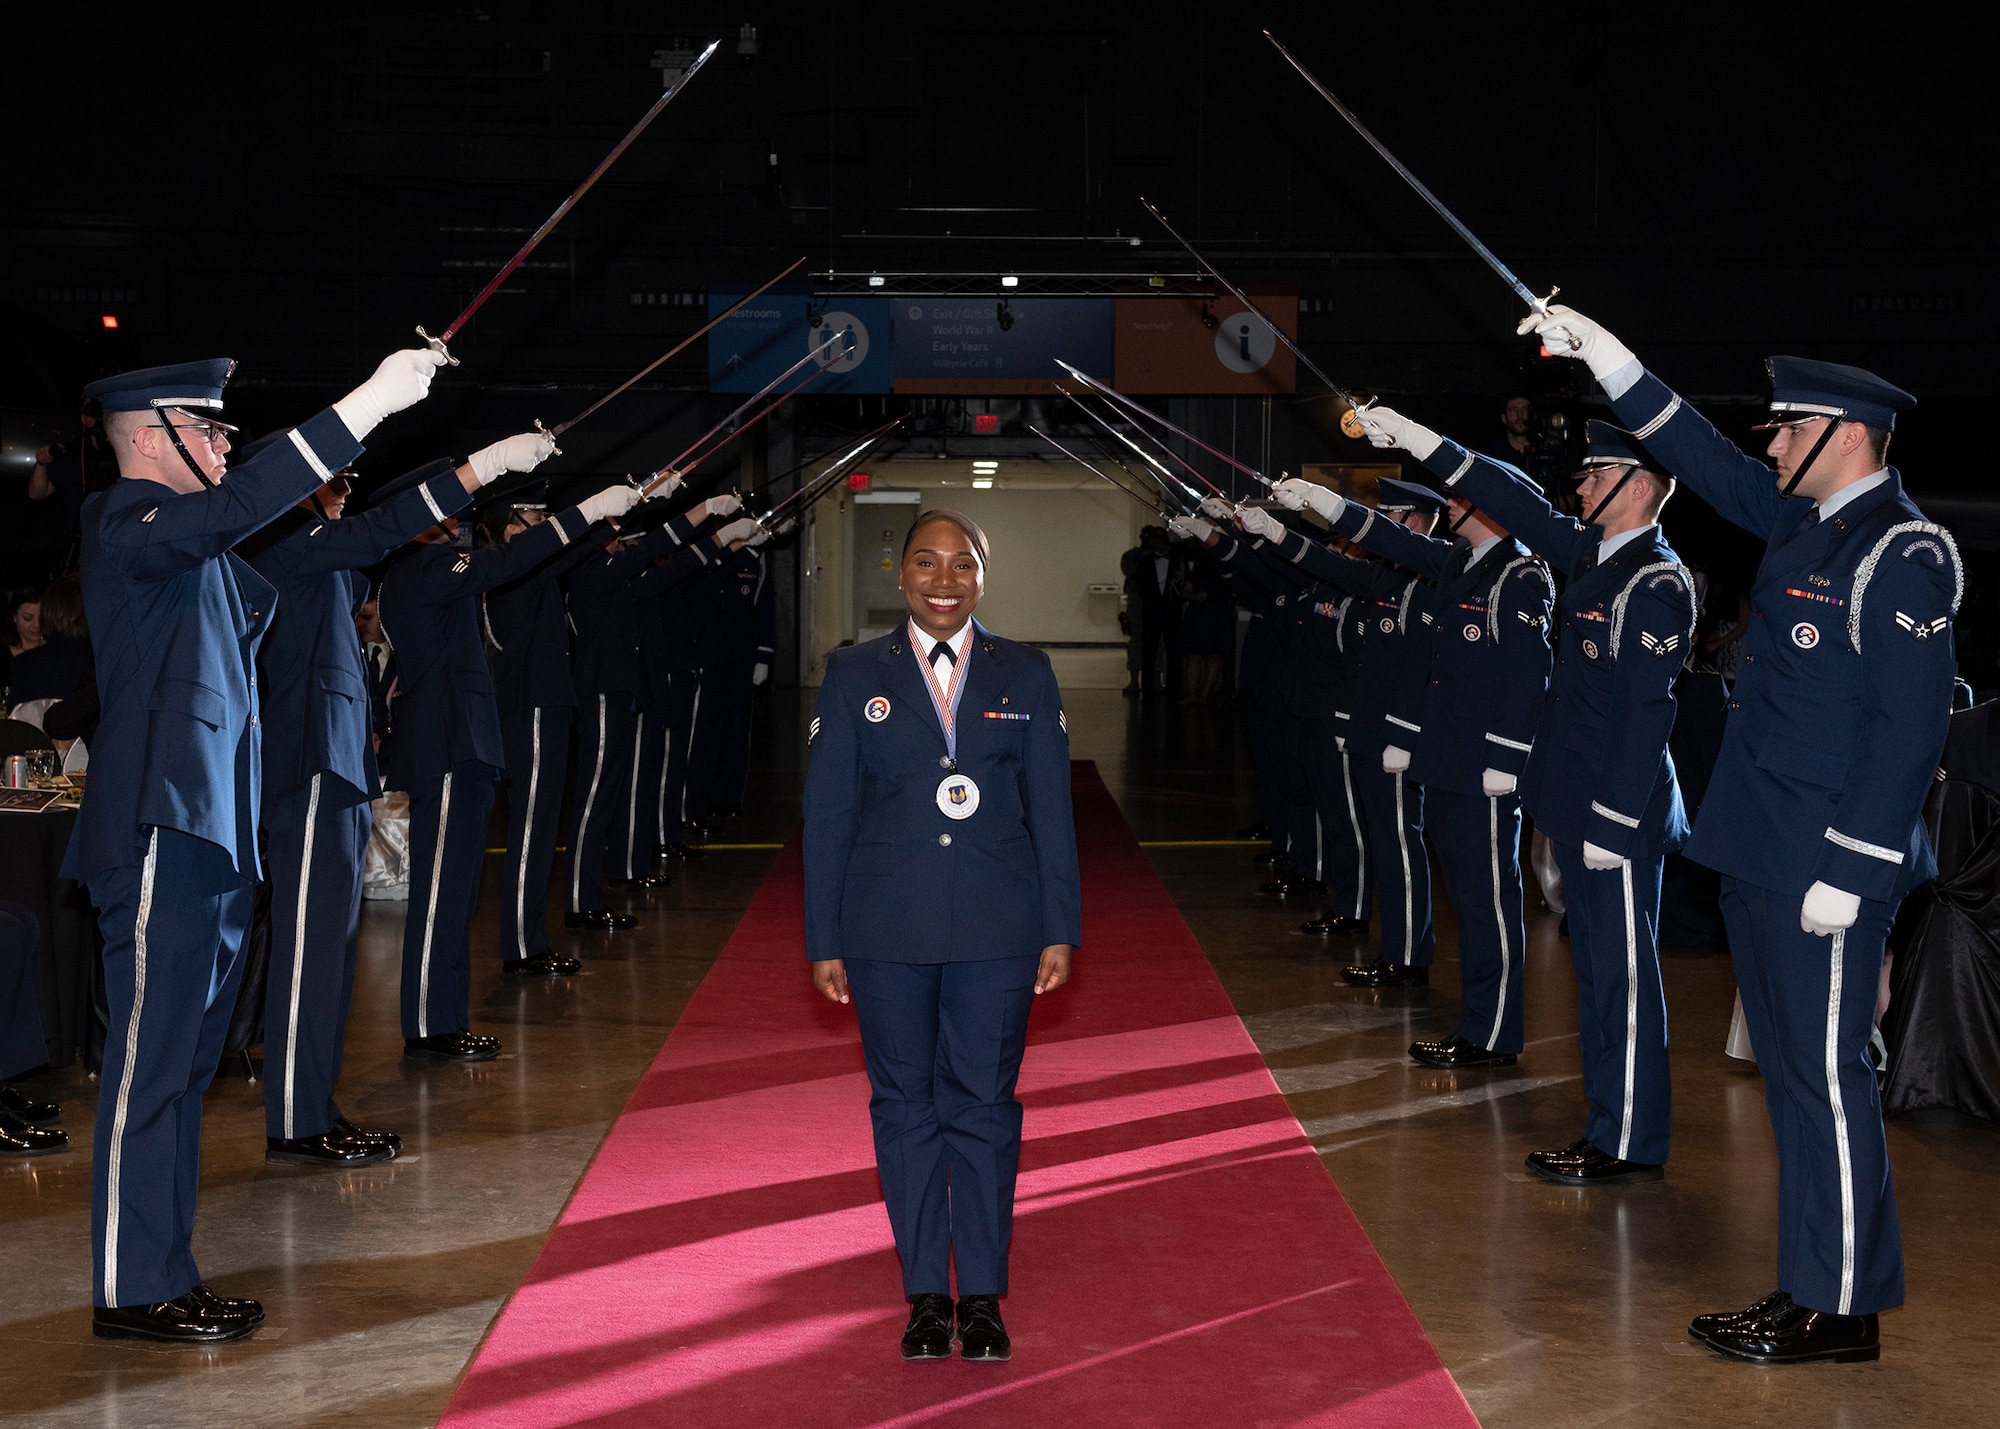 Senior Airman Mutia Graham, Air Force Test Center, walks through a formation of sabers during Air Force Materiel Command's Annual Excellence Awards Banquet March 6, 2019, at Wright-Patterson Air Force Base, Ohio. (U.S. Air Force photo by Michelle Gigante)